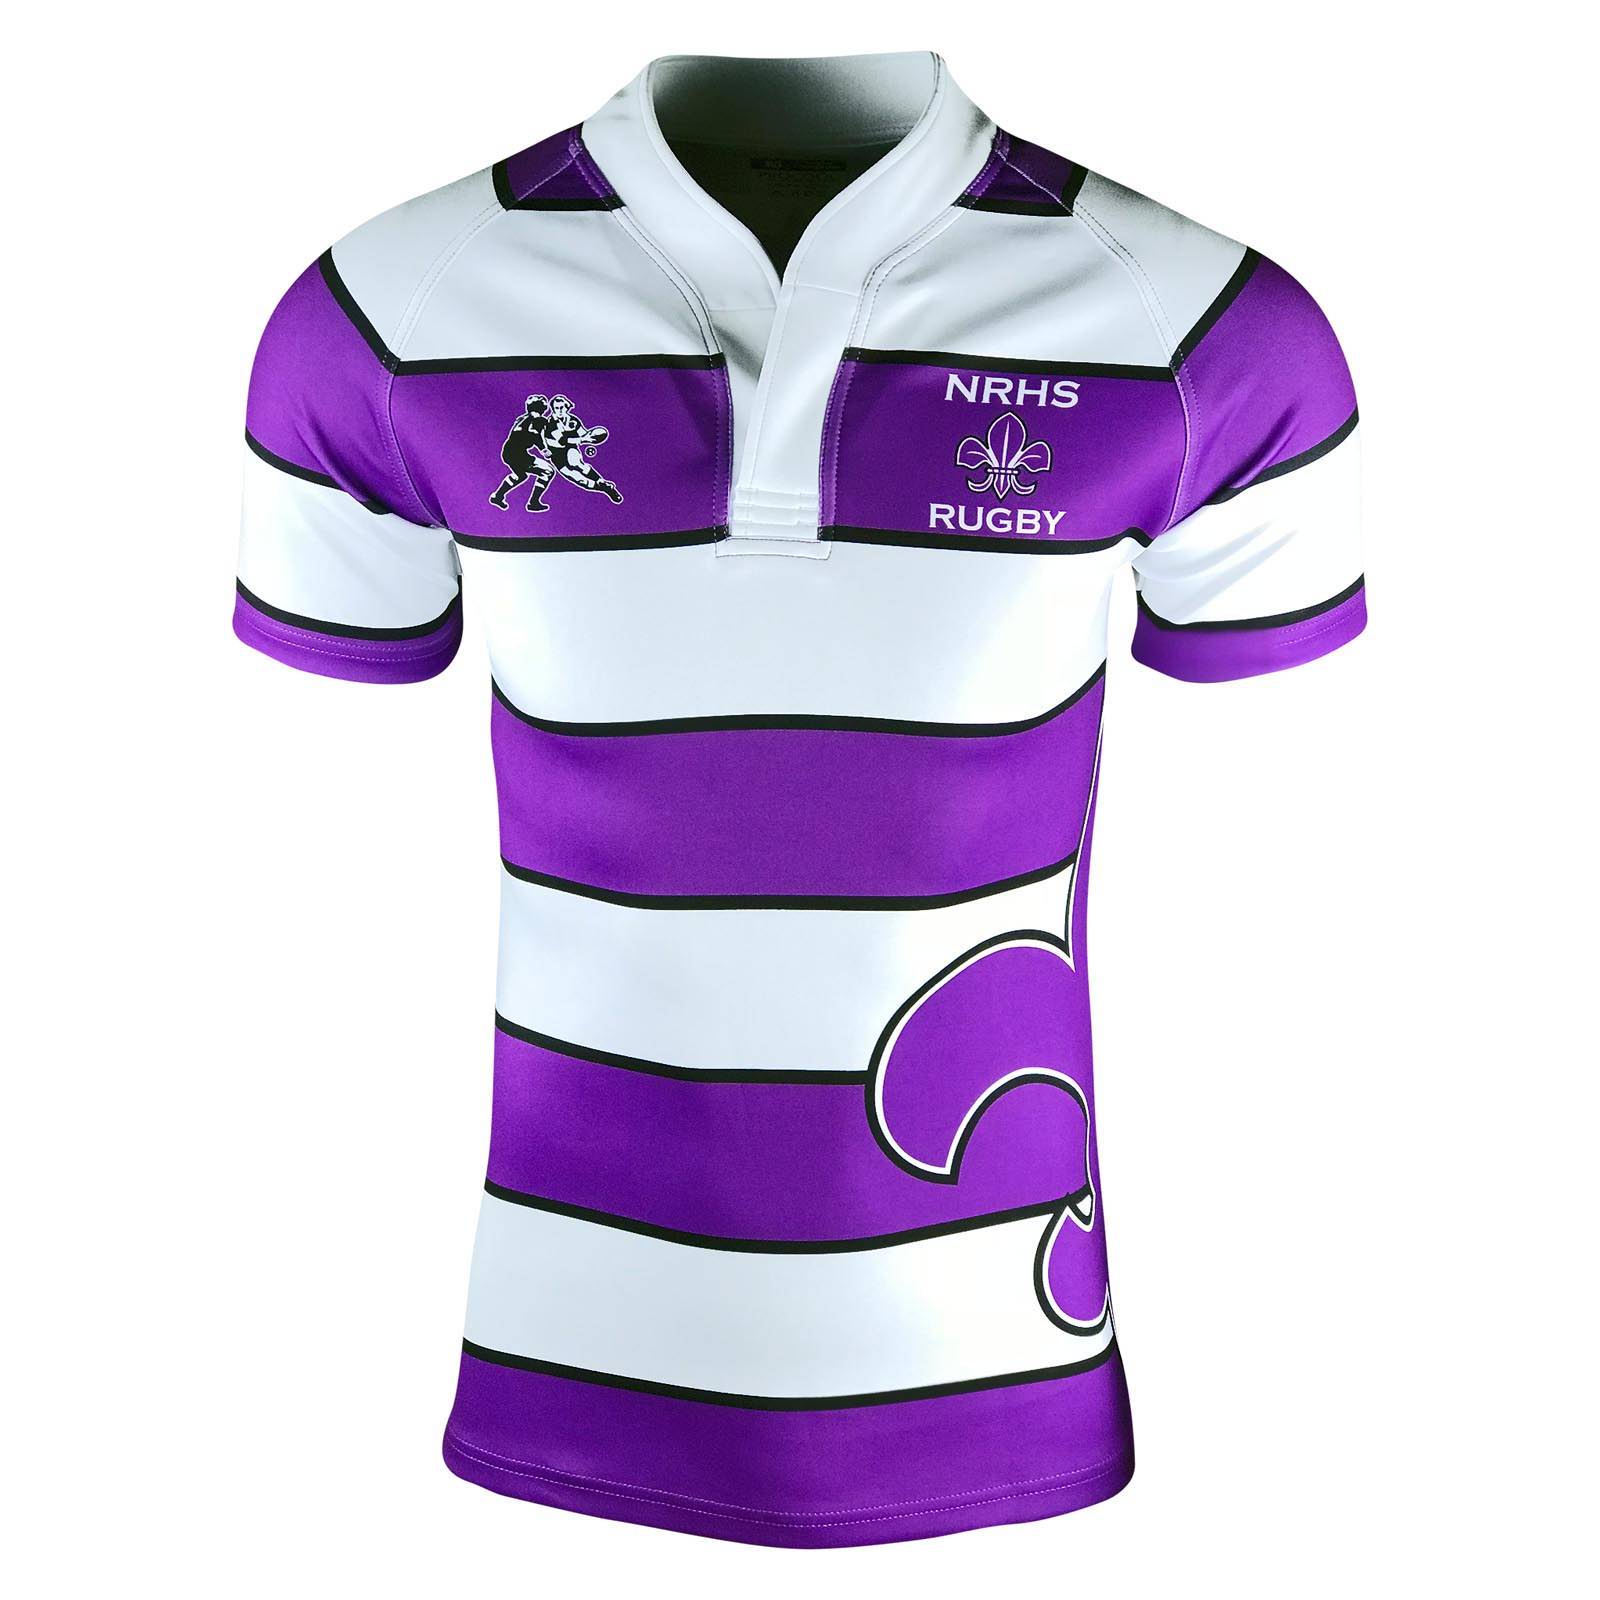 Lynagh - Custom Rugby Jersey Design - Reversible Rugby Jerseys